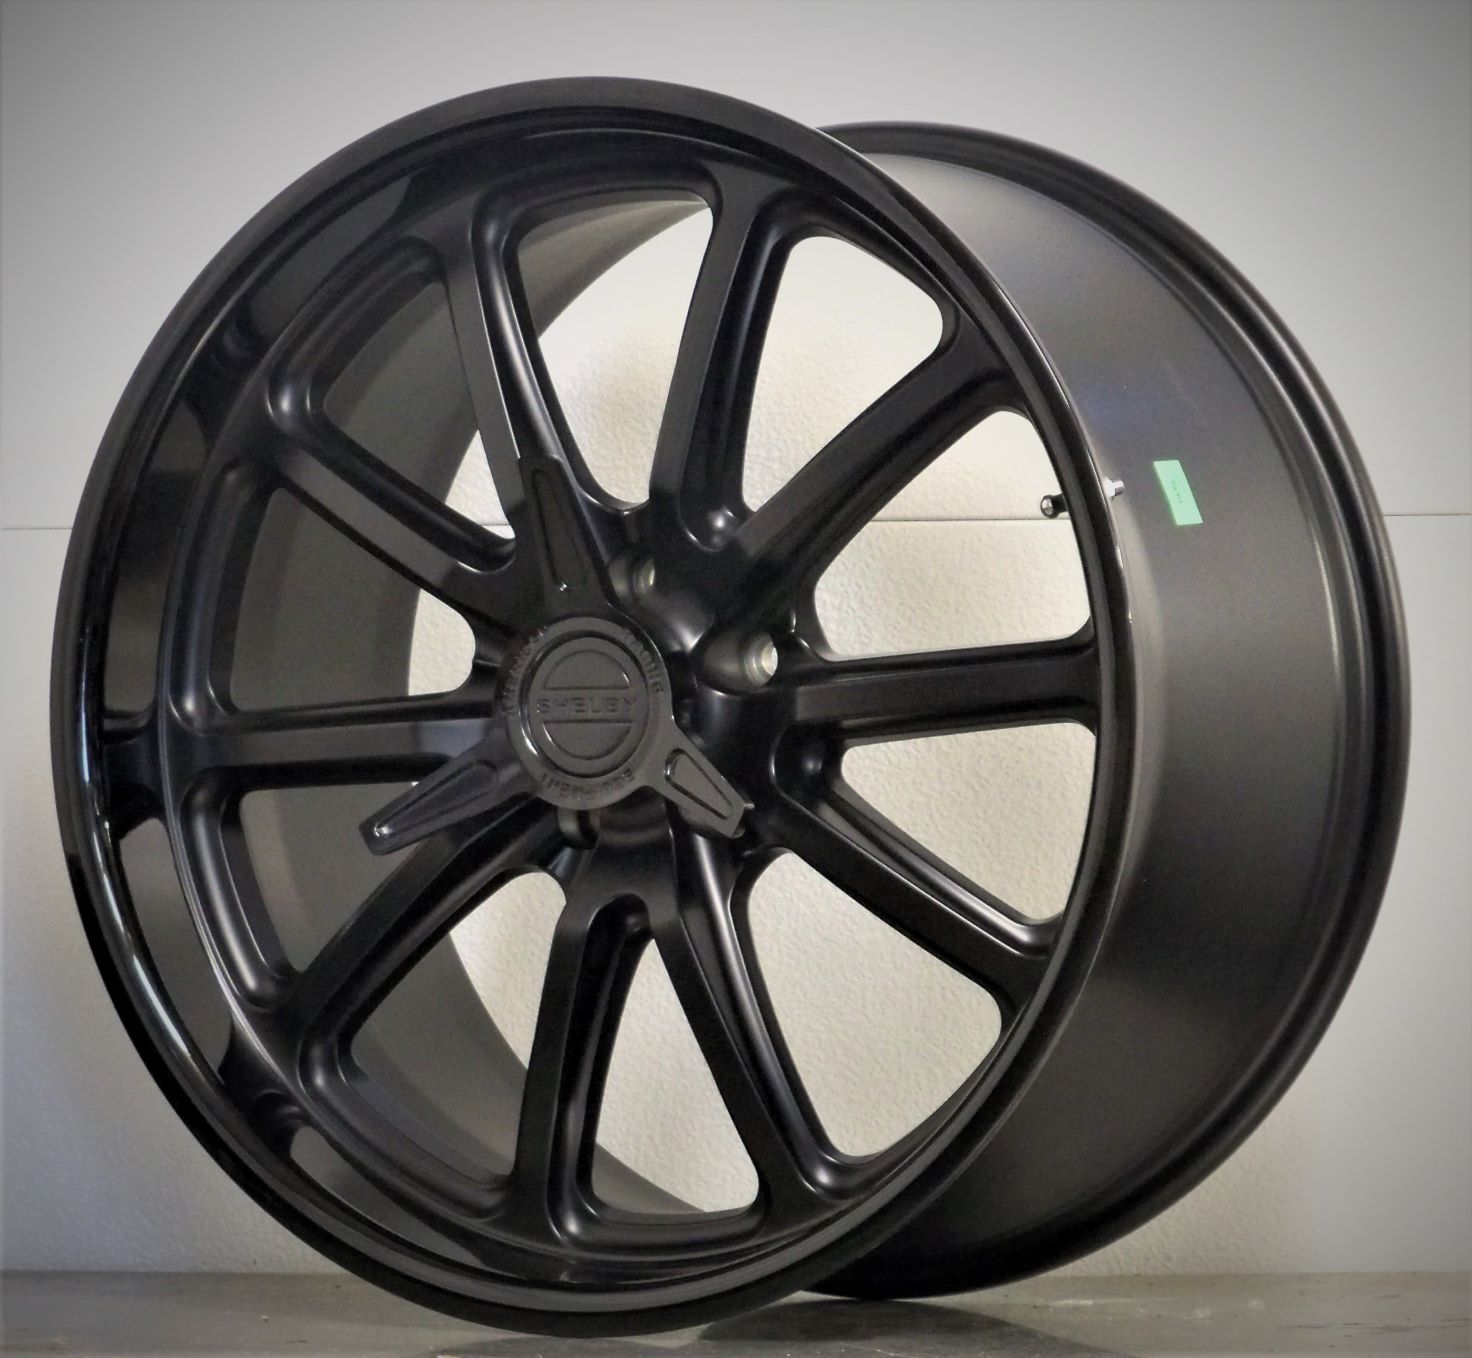 U123S US Mags all over black with black Shelby spinners